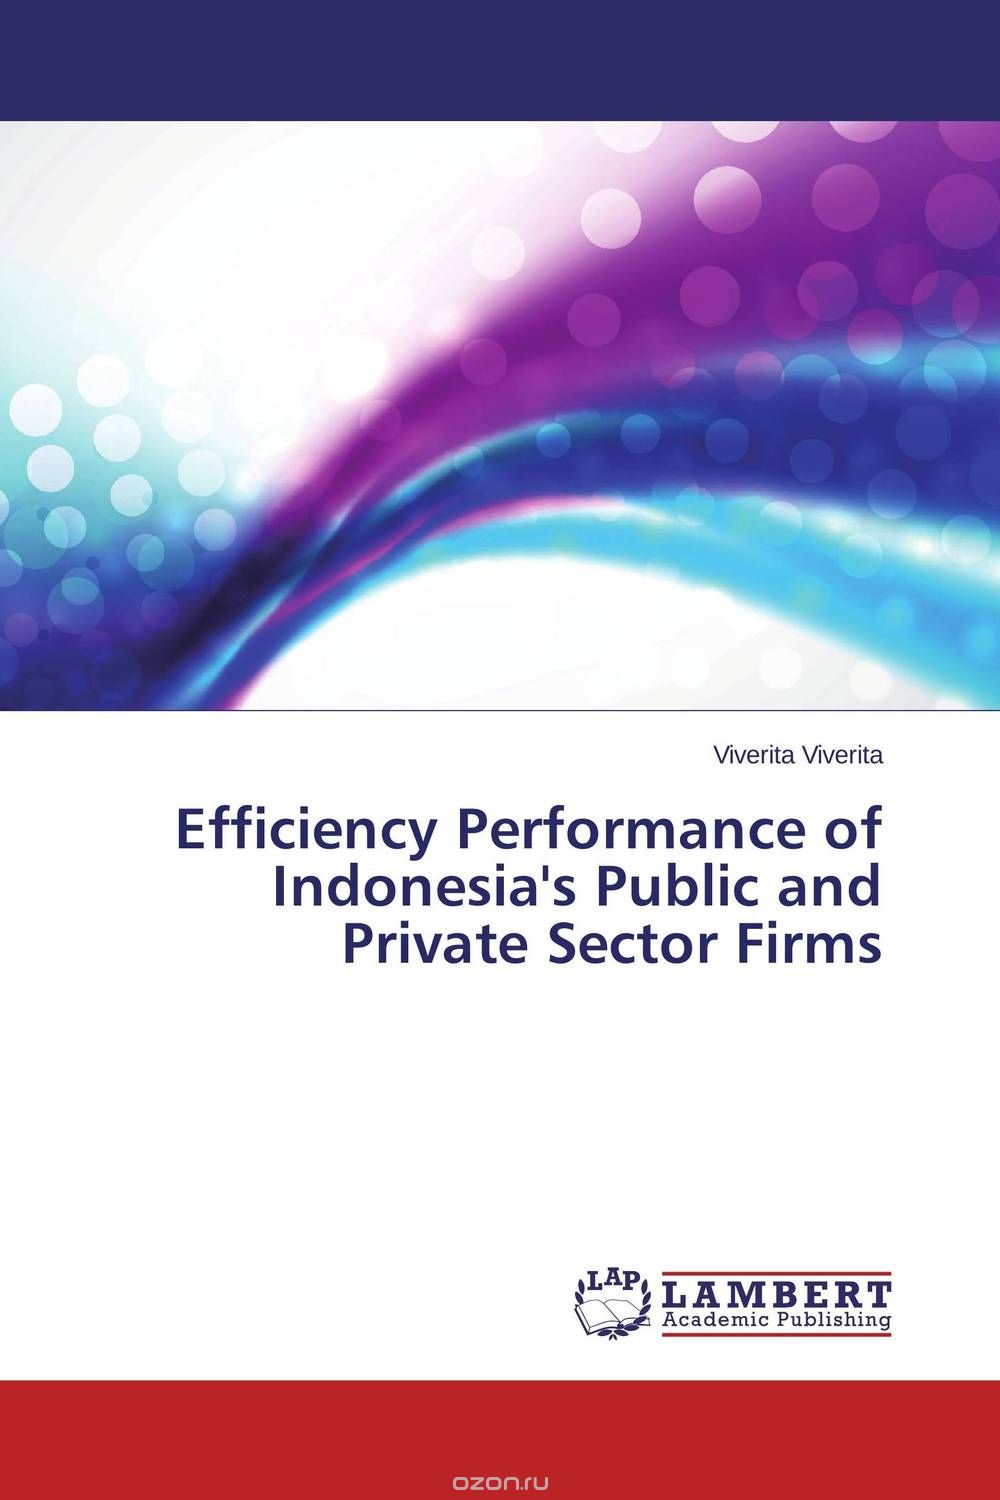 Efficiency Performance of Indonesia's Public and Private Sector Firms